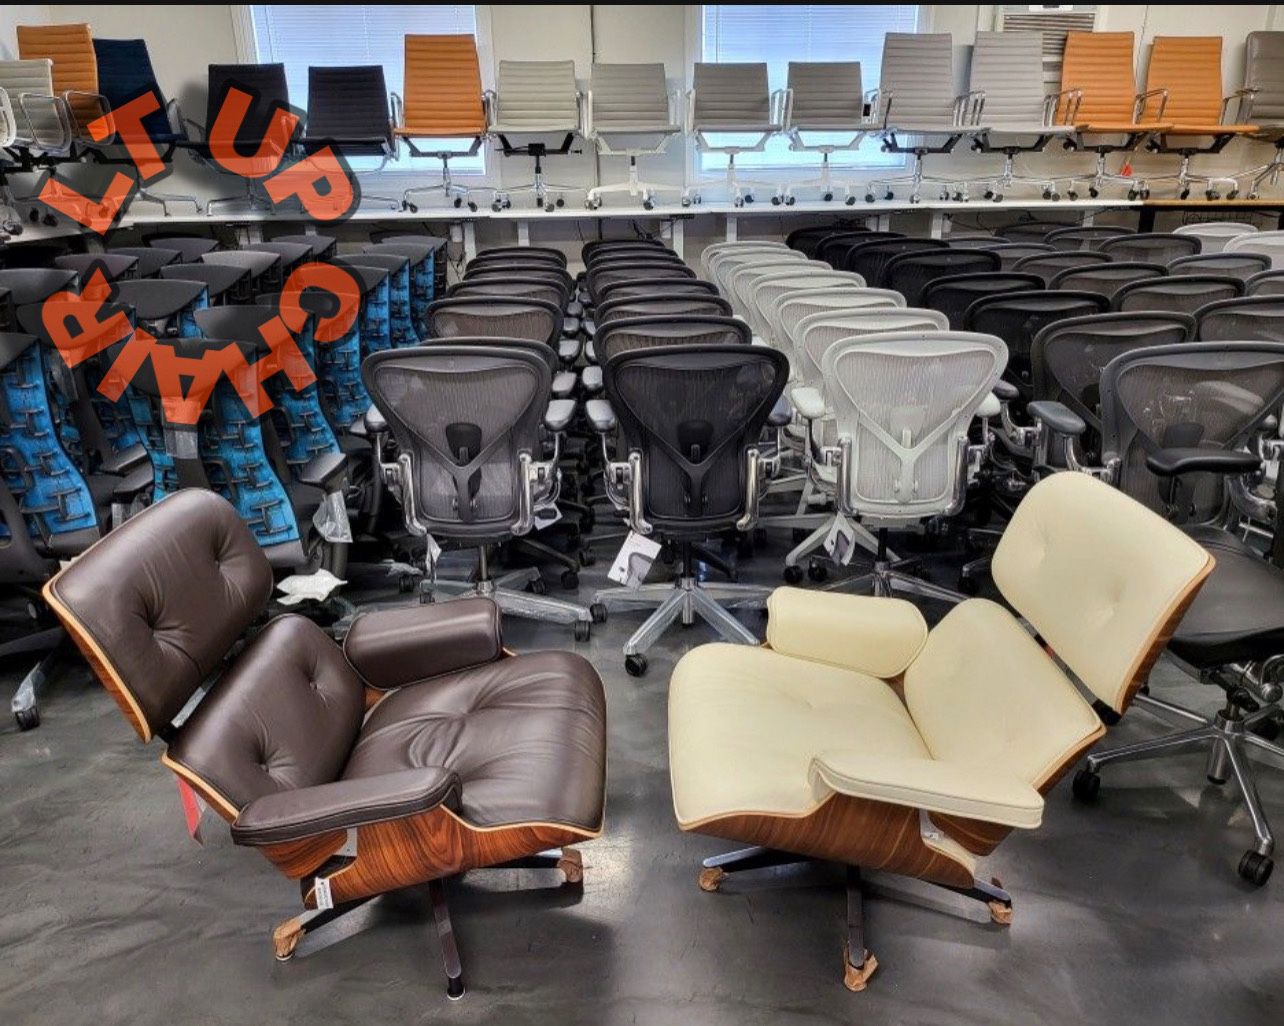 WE HAVE ALL CHAIRS FROM HERMAN MILLER STAR AT $399